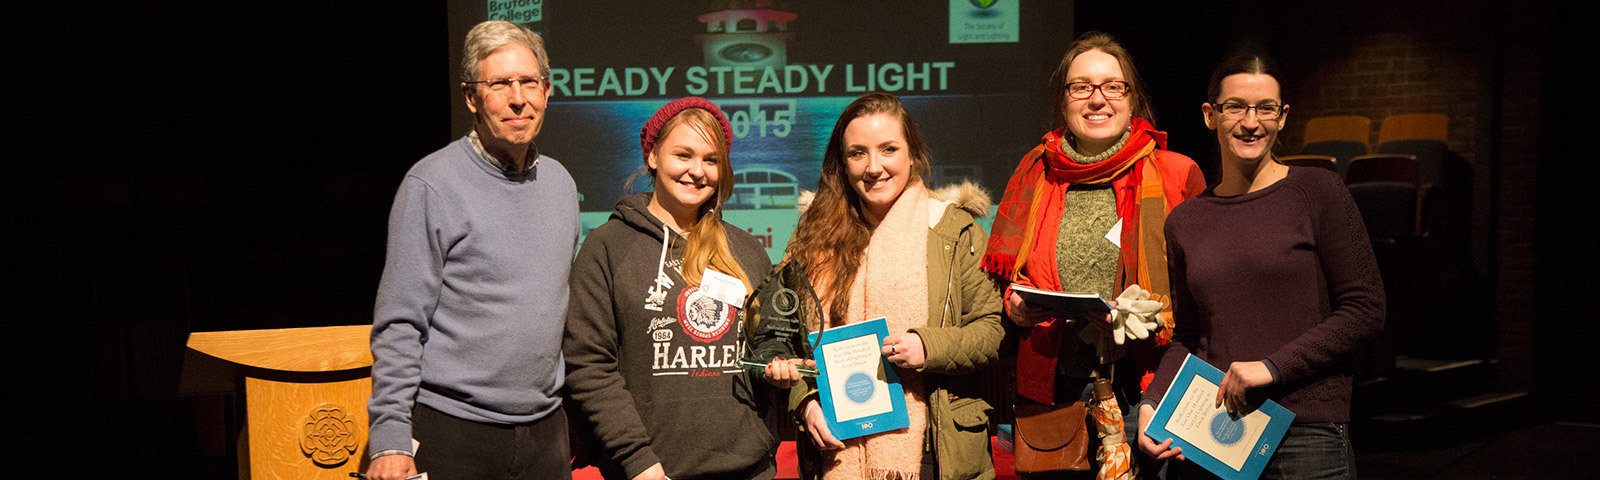 Thorlux wins the ‘Technical Award’ at SLL Ready Steady Light 2015